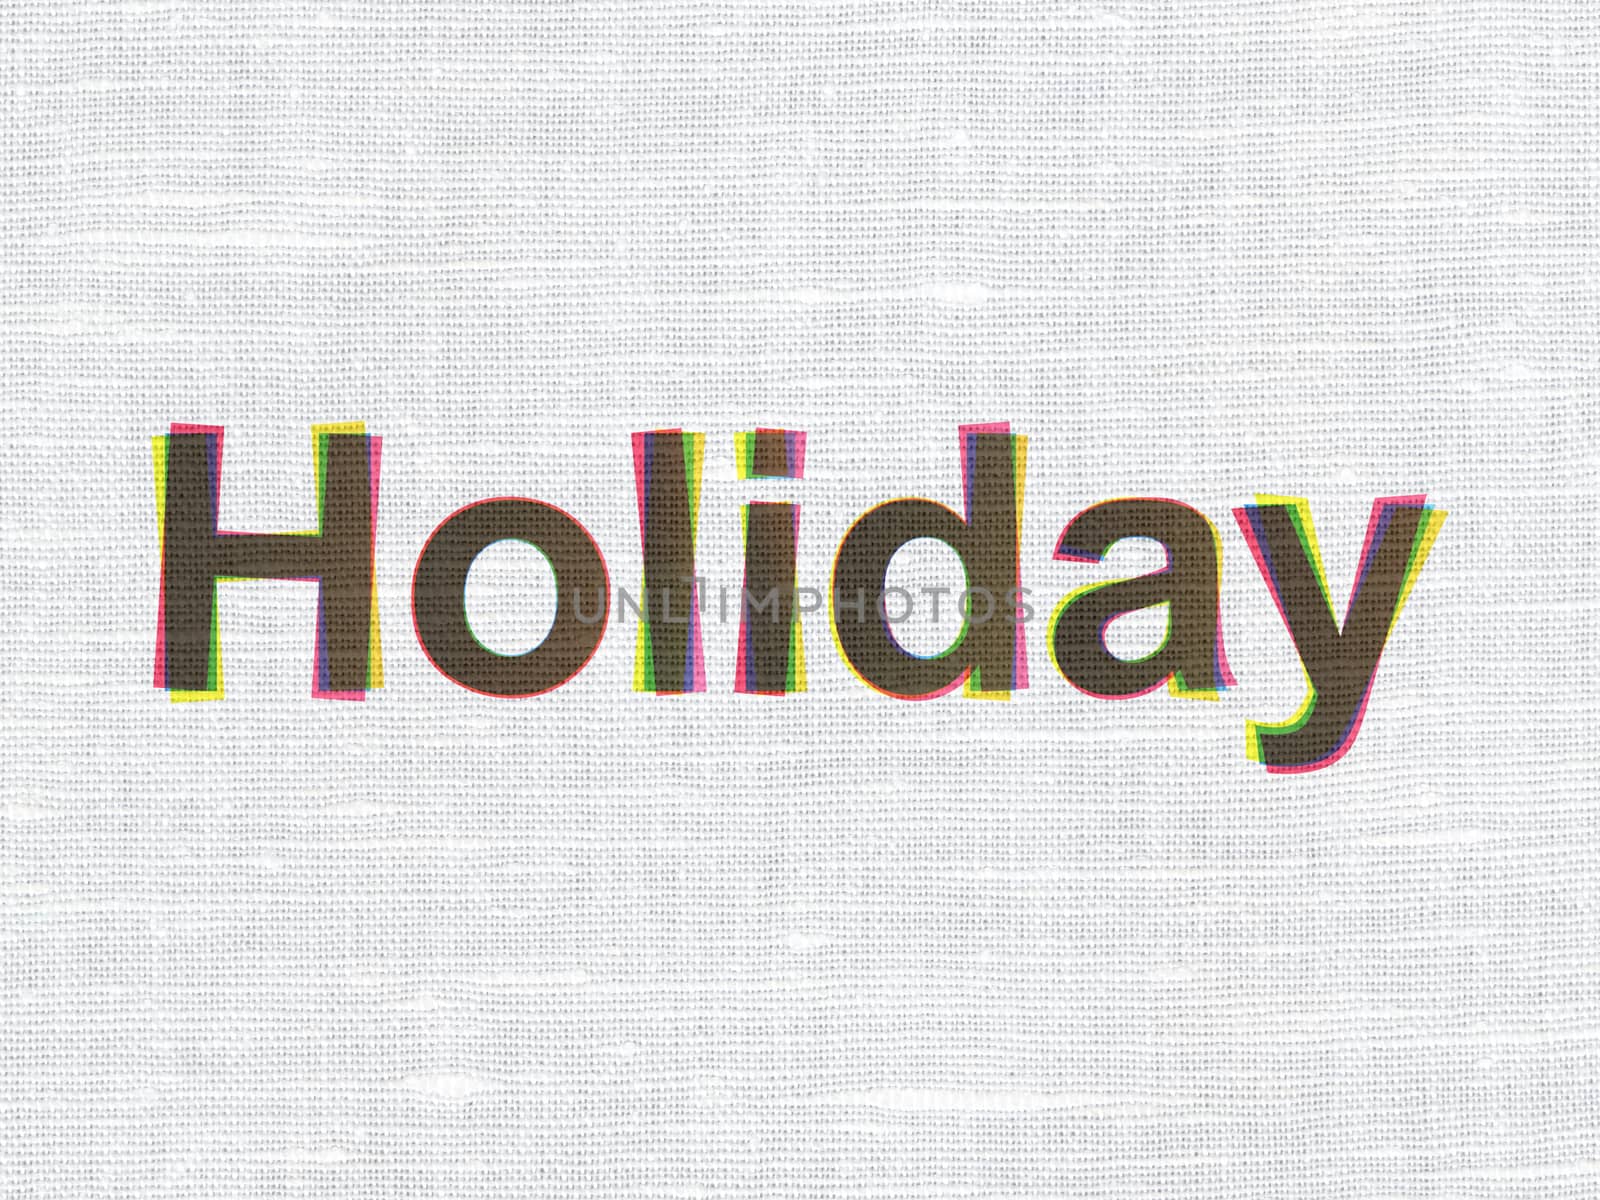 Entertainment, concept: CMYK Holiday on linen fabric texture background